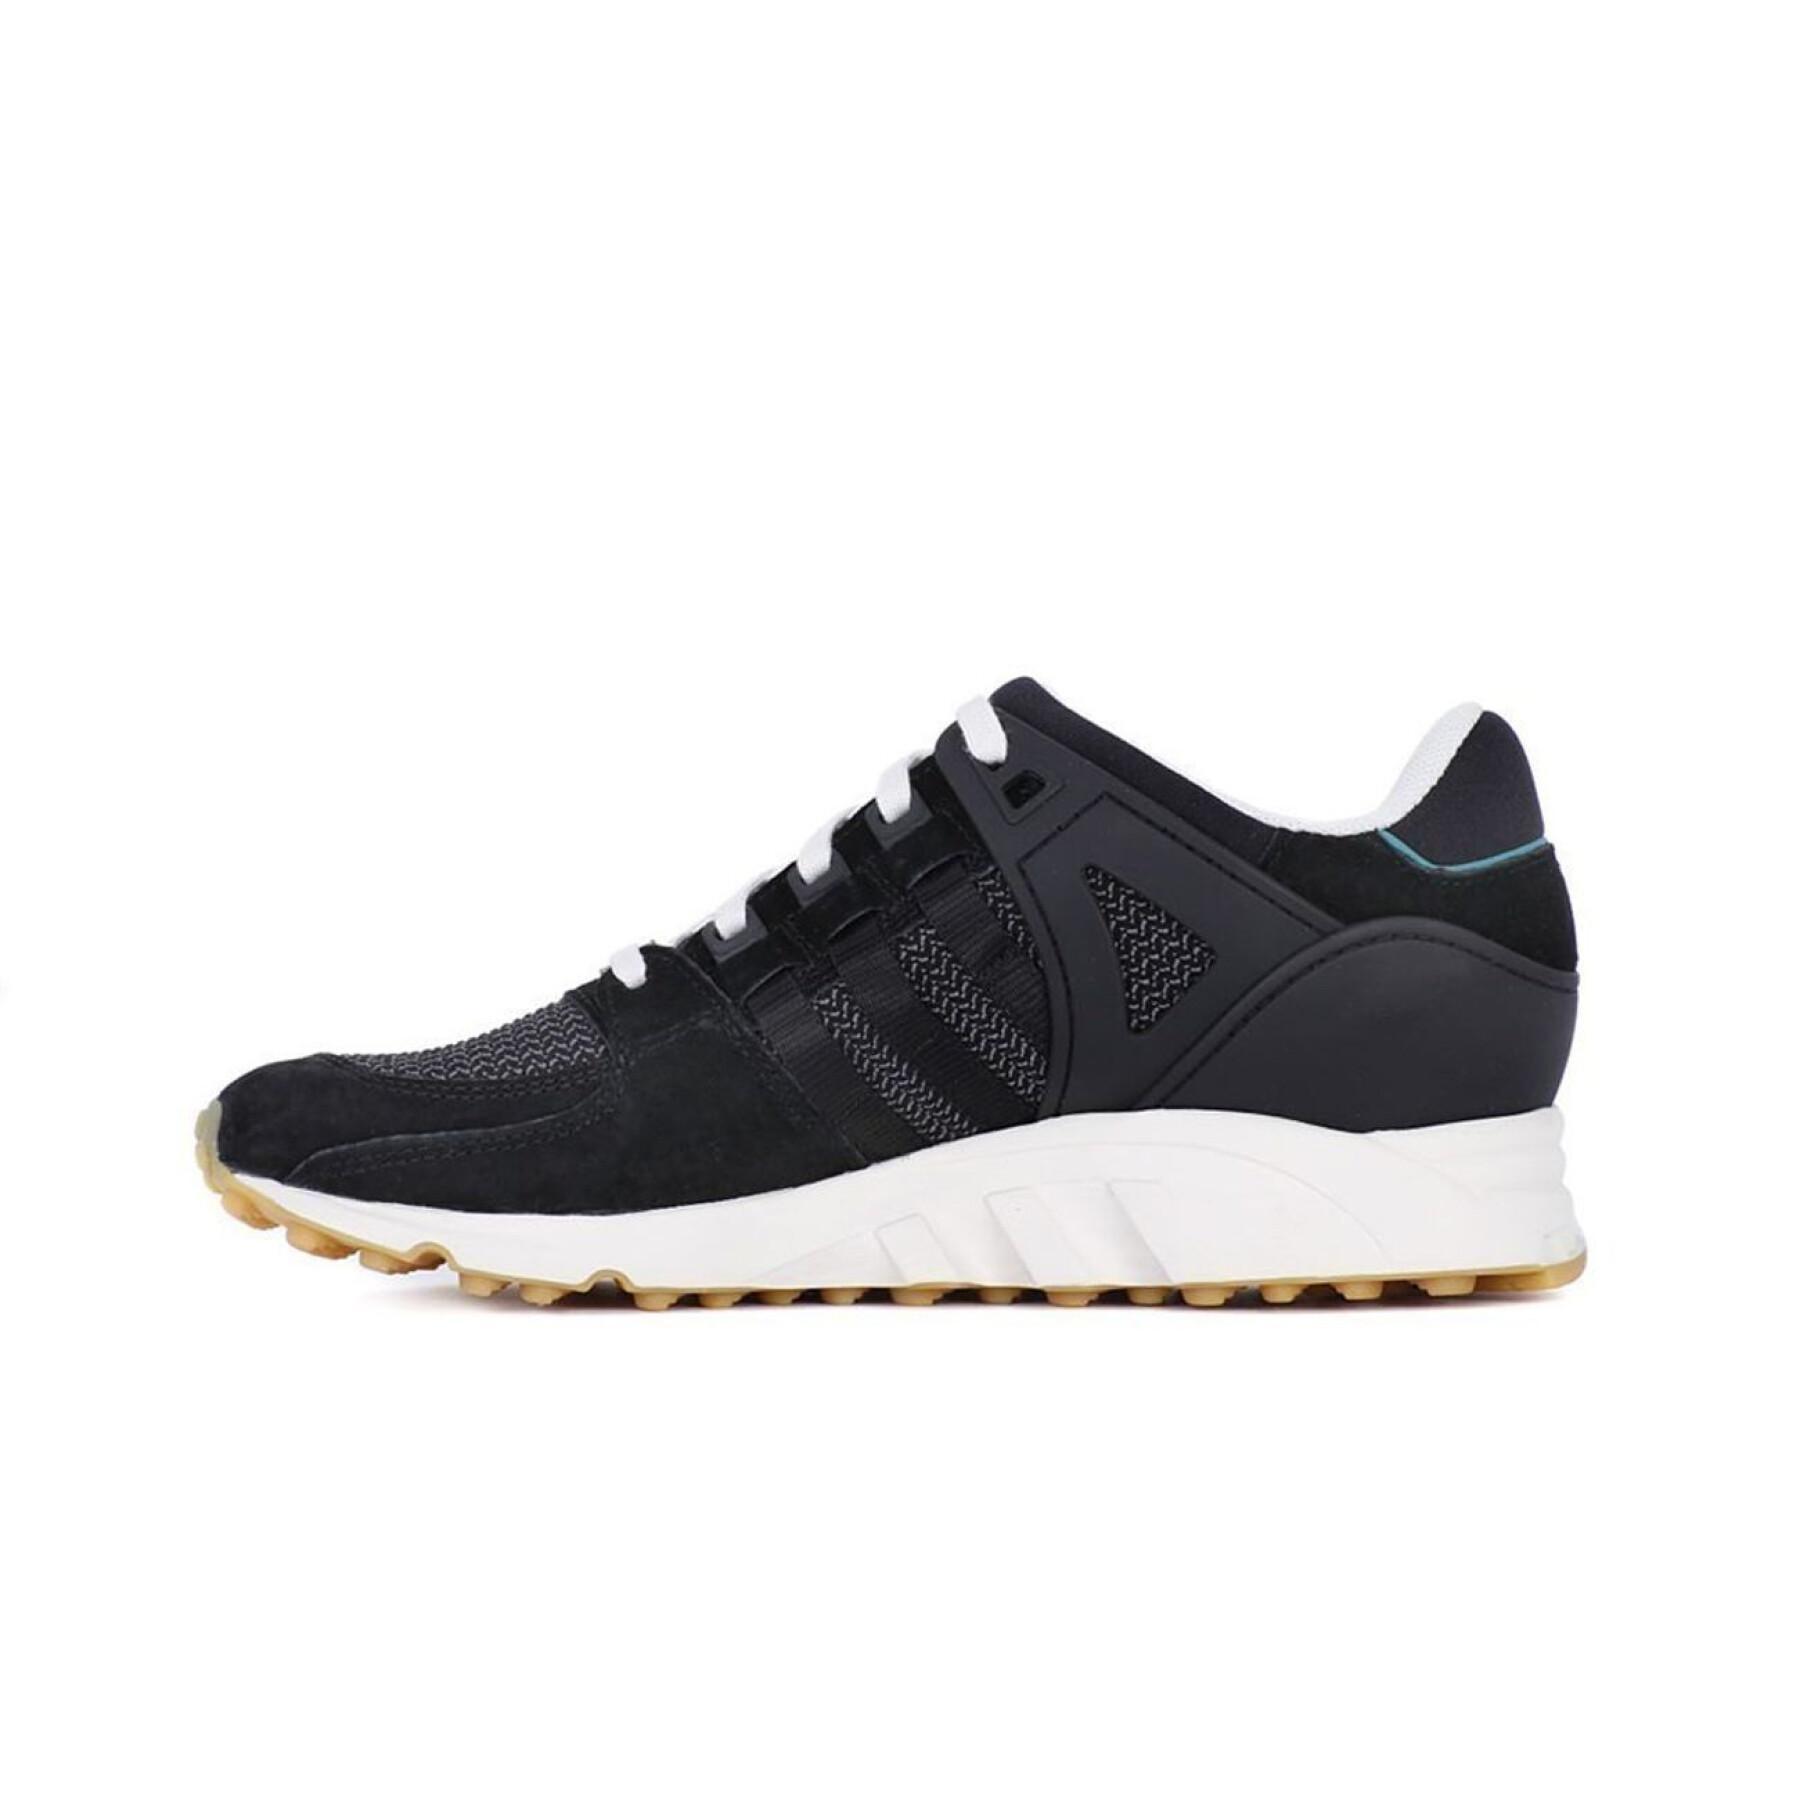 Women's sneakers adidas Eqt Support